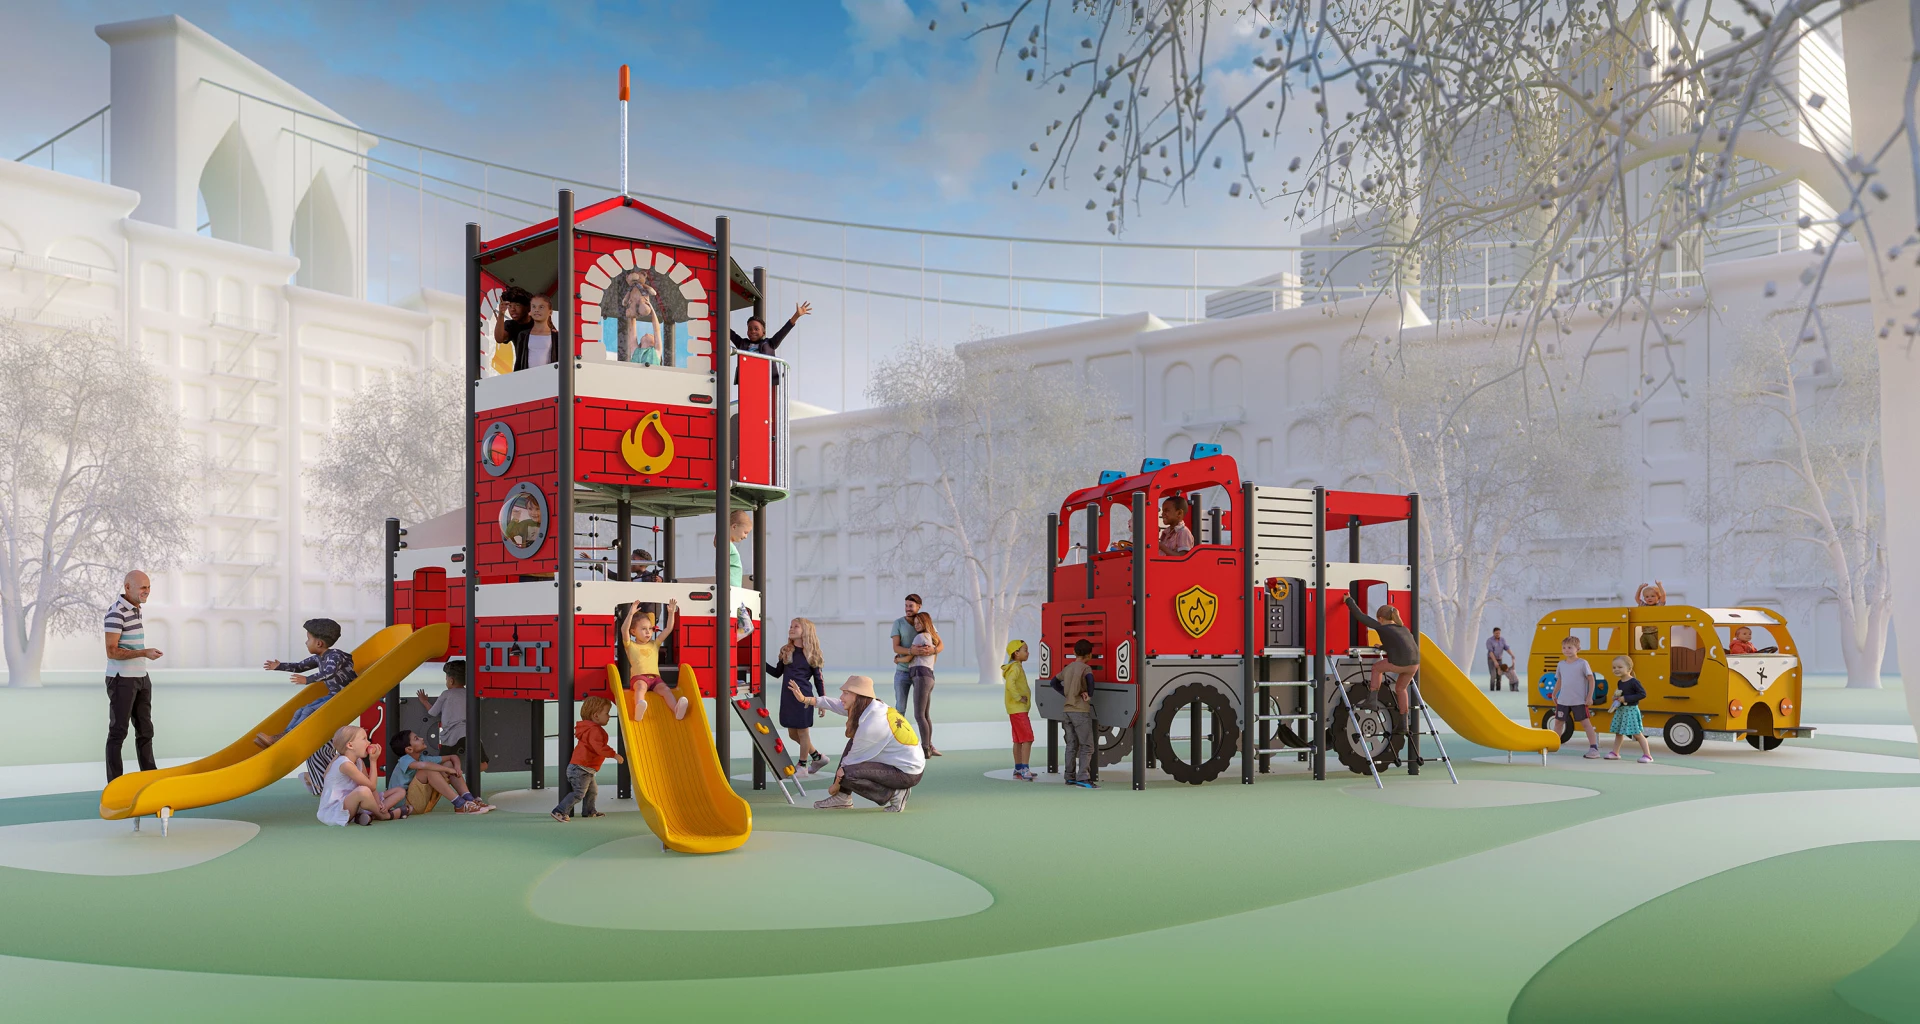 Inspirational playground design of a fire station